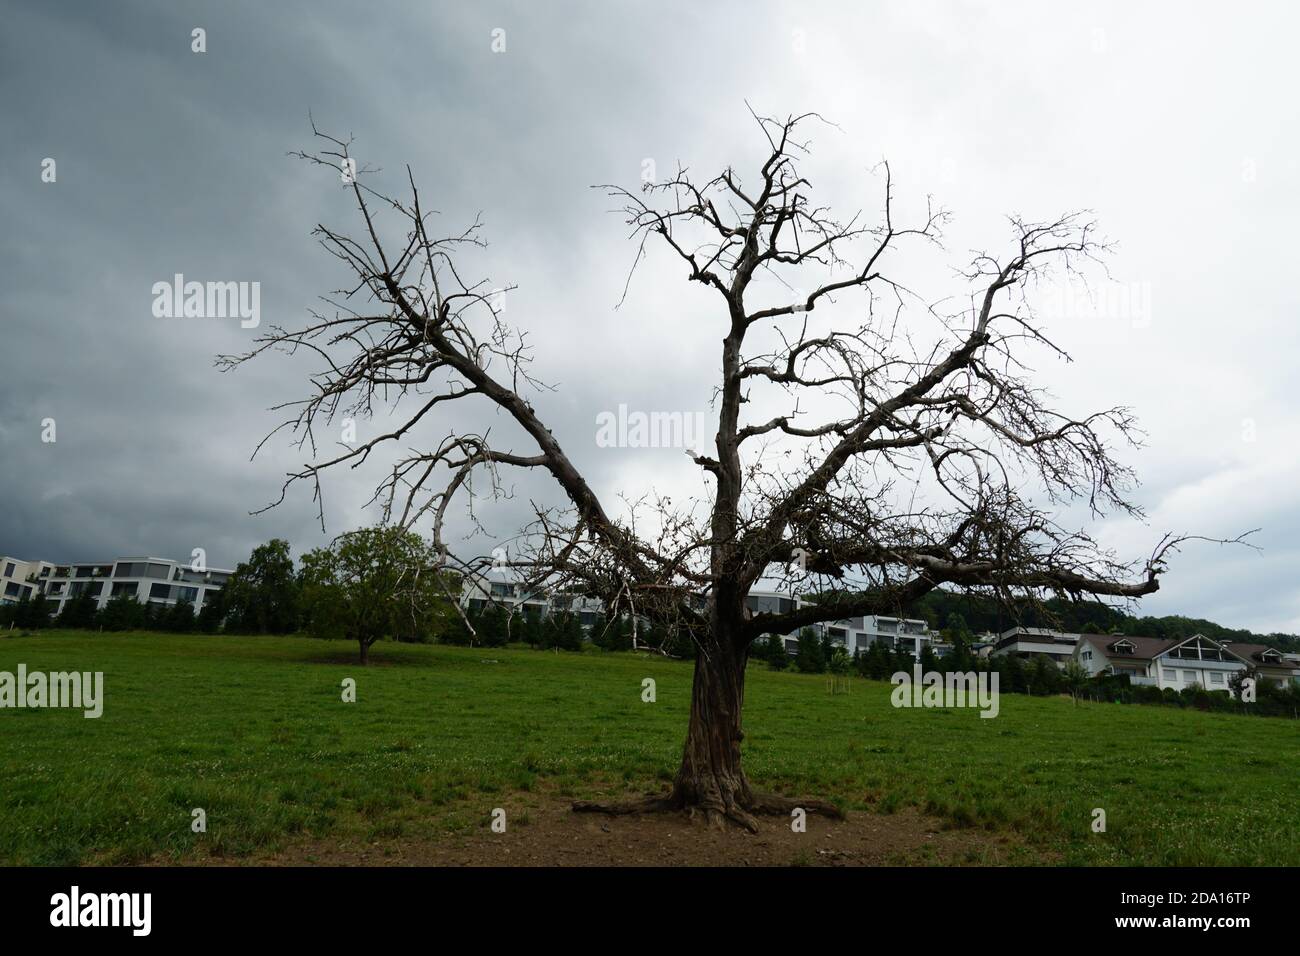 Dead tree on a green meadow with residential district on the background.   Parable or symbol for negative impact of human presence and activity. Stock Photo